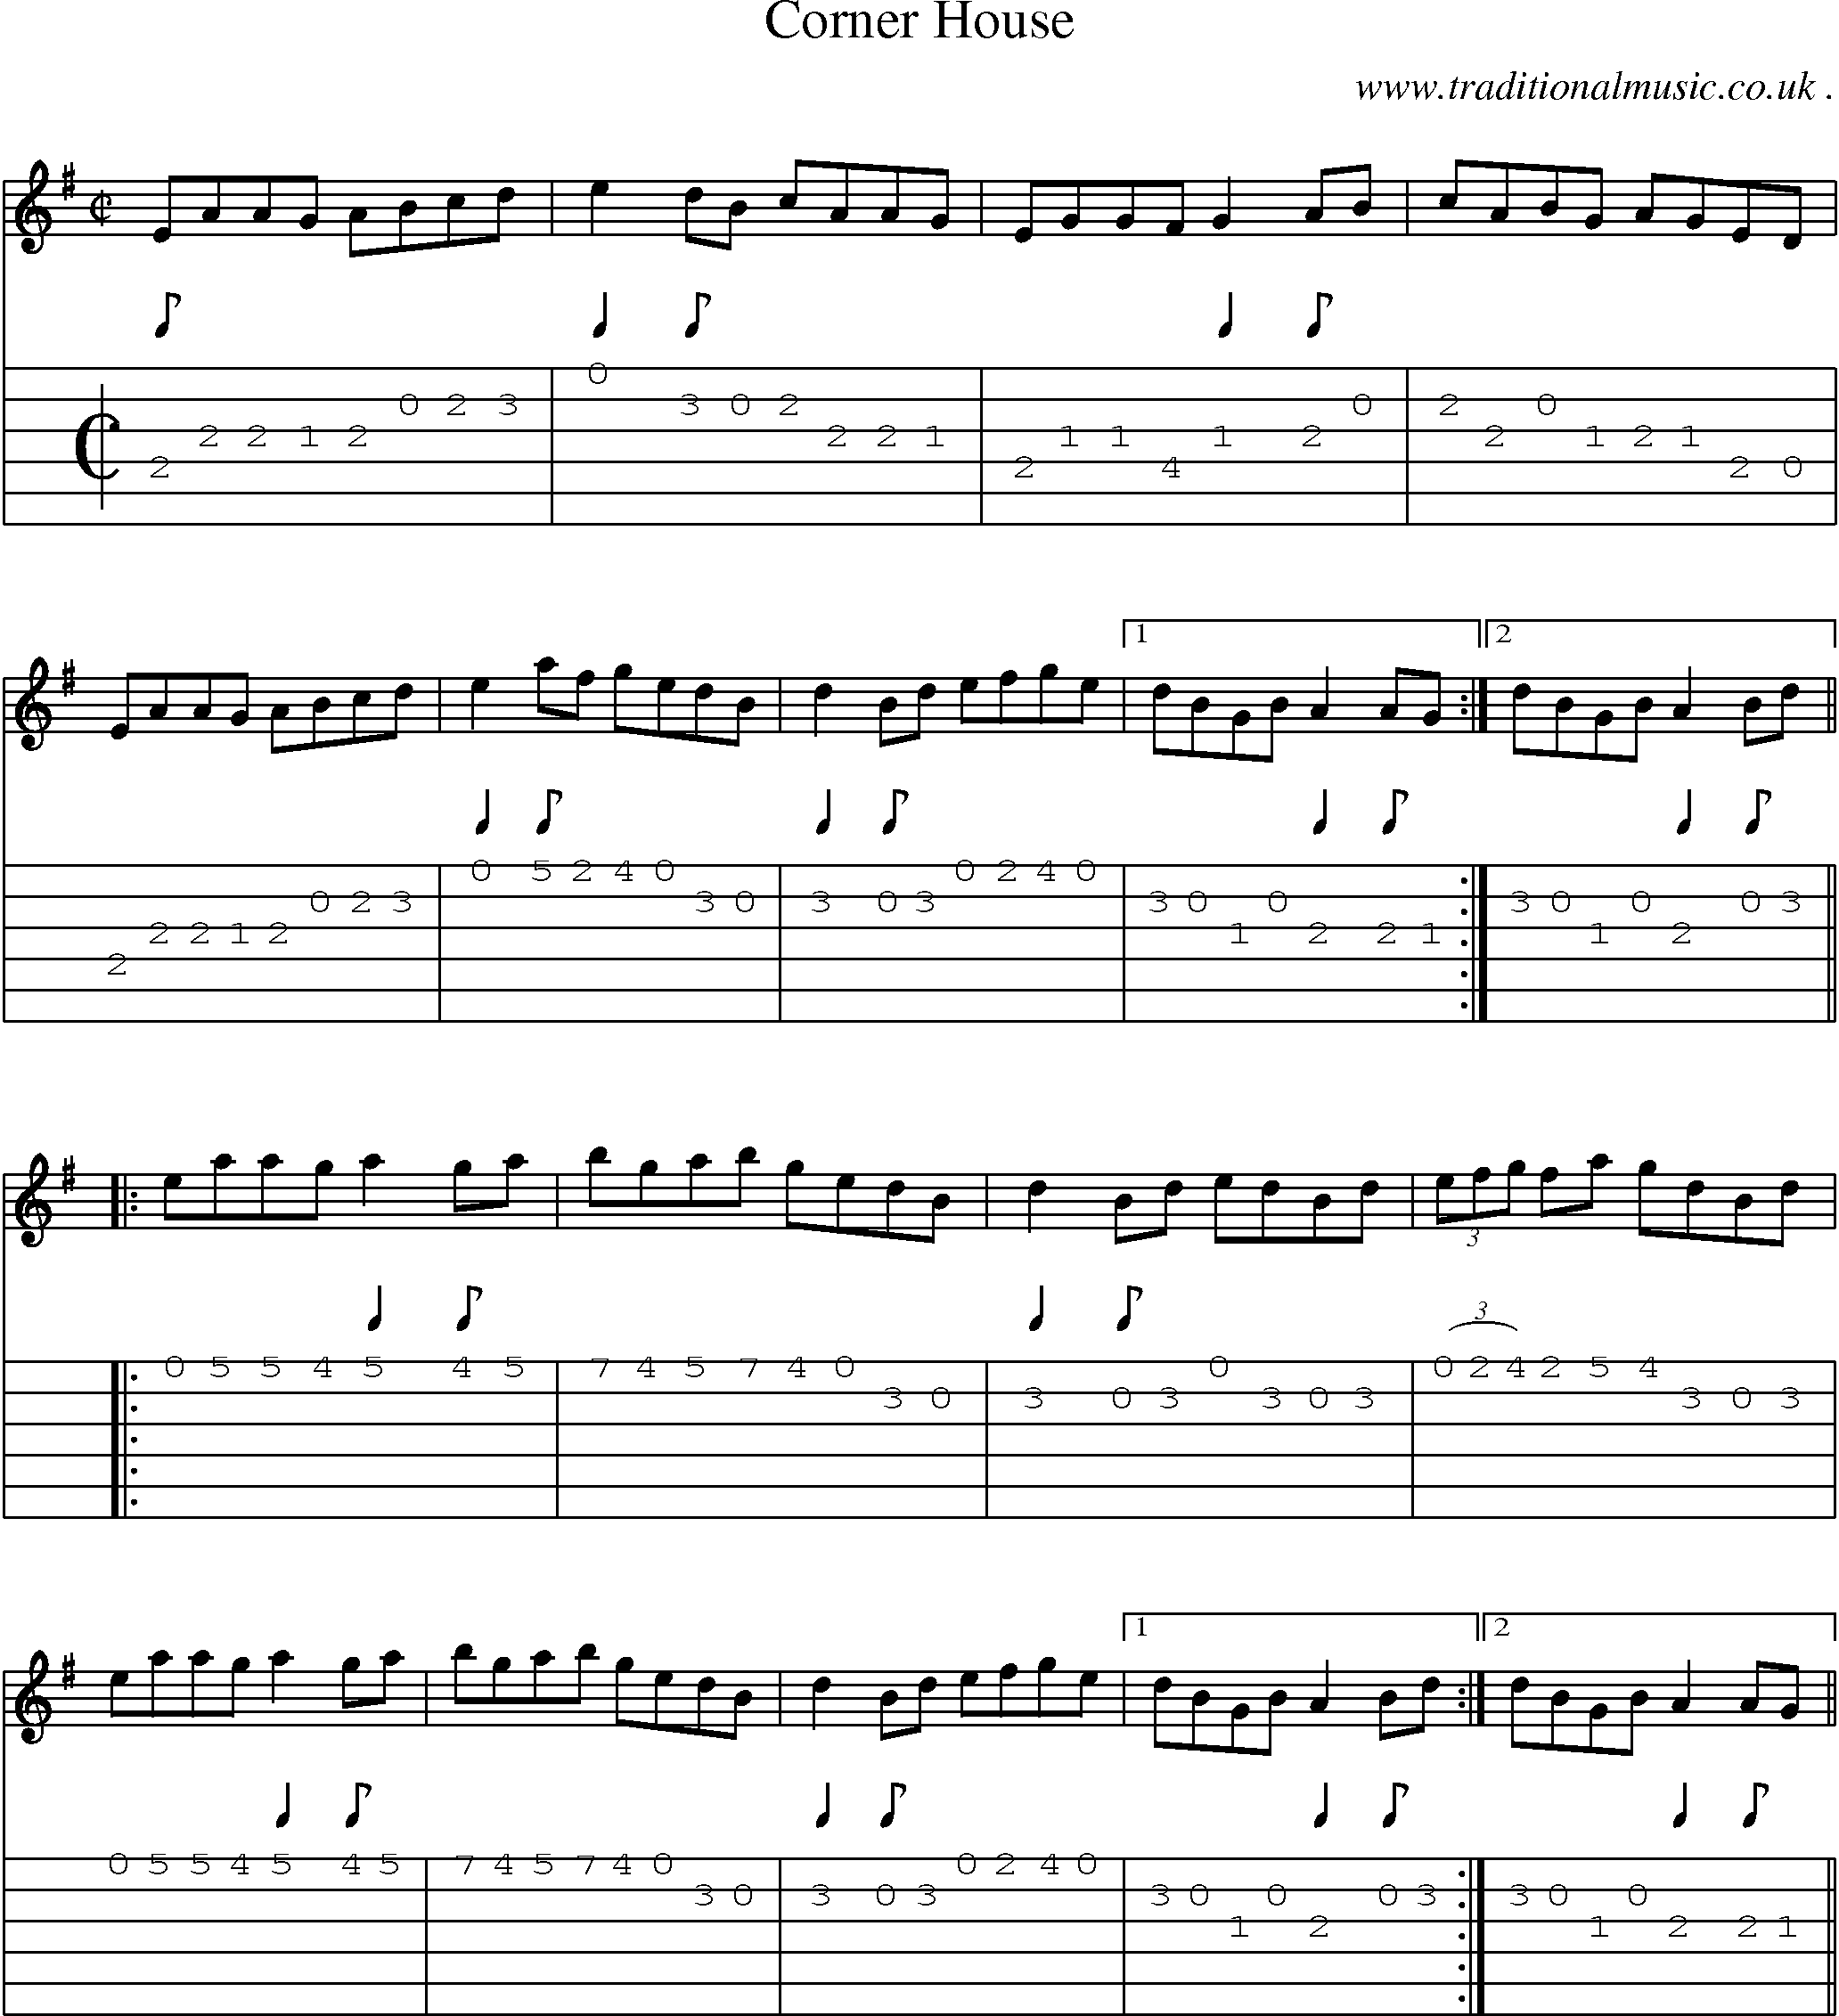 Sheet-Music and Guitar Tabs for Corner House